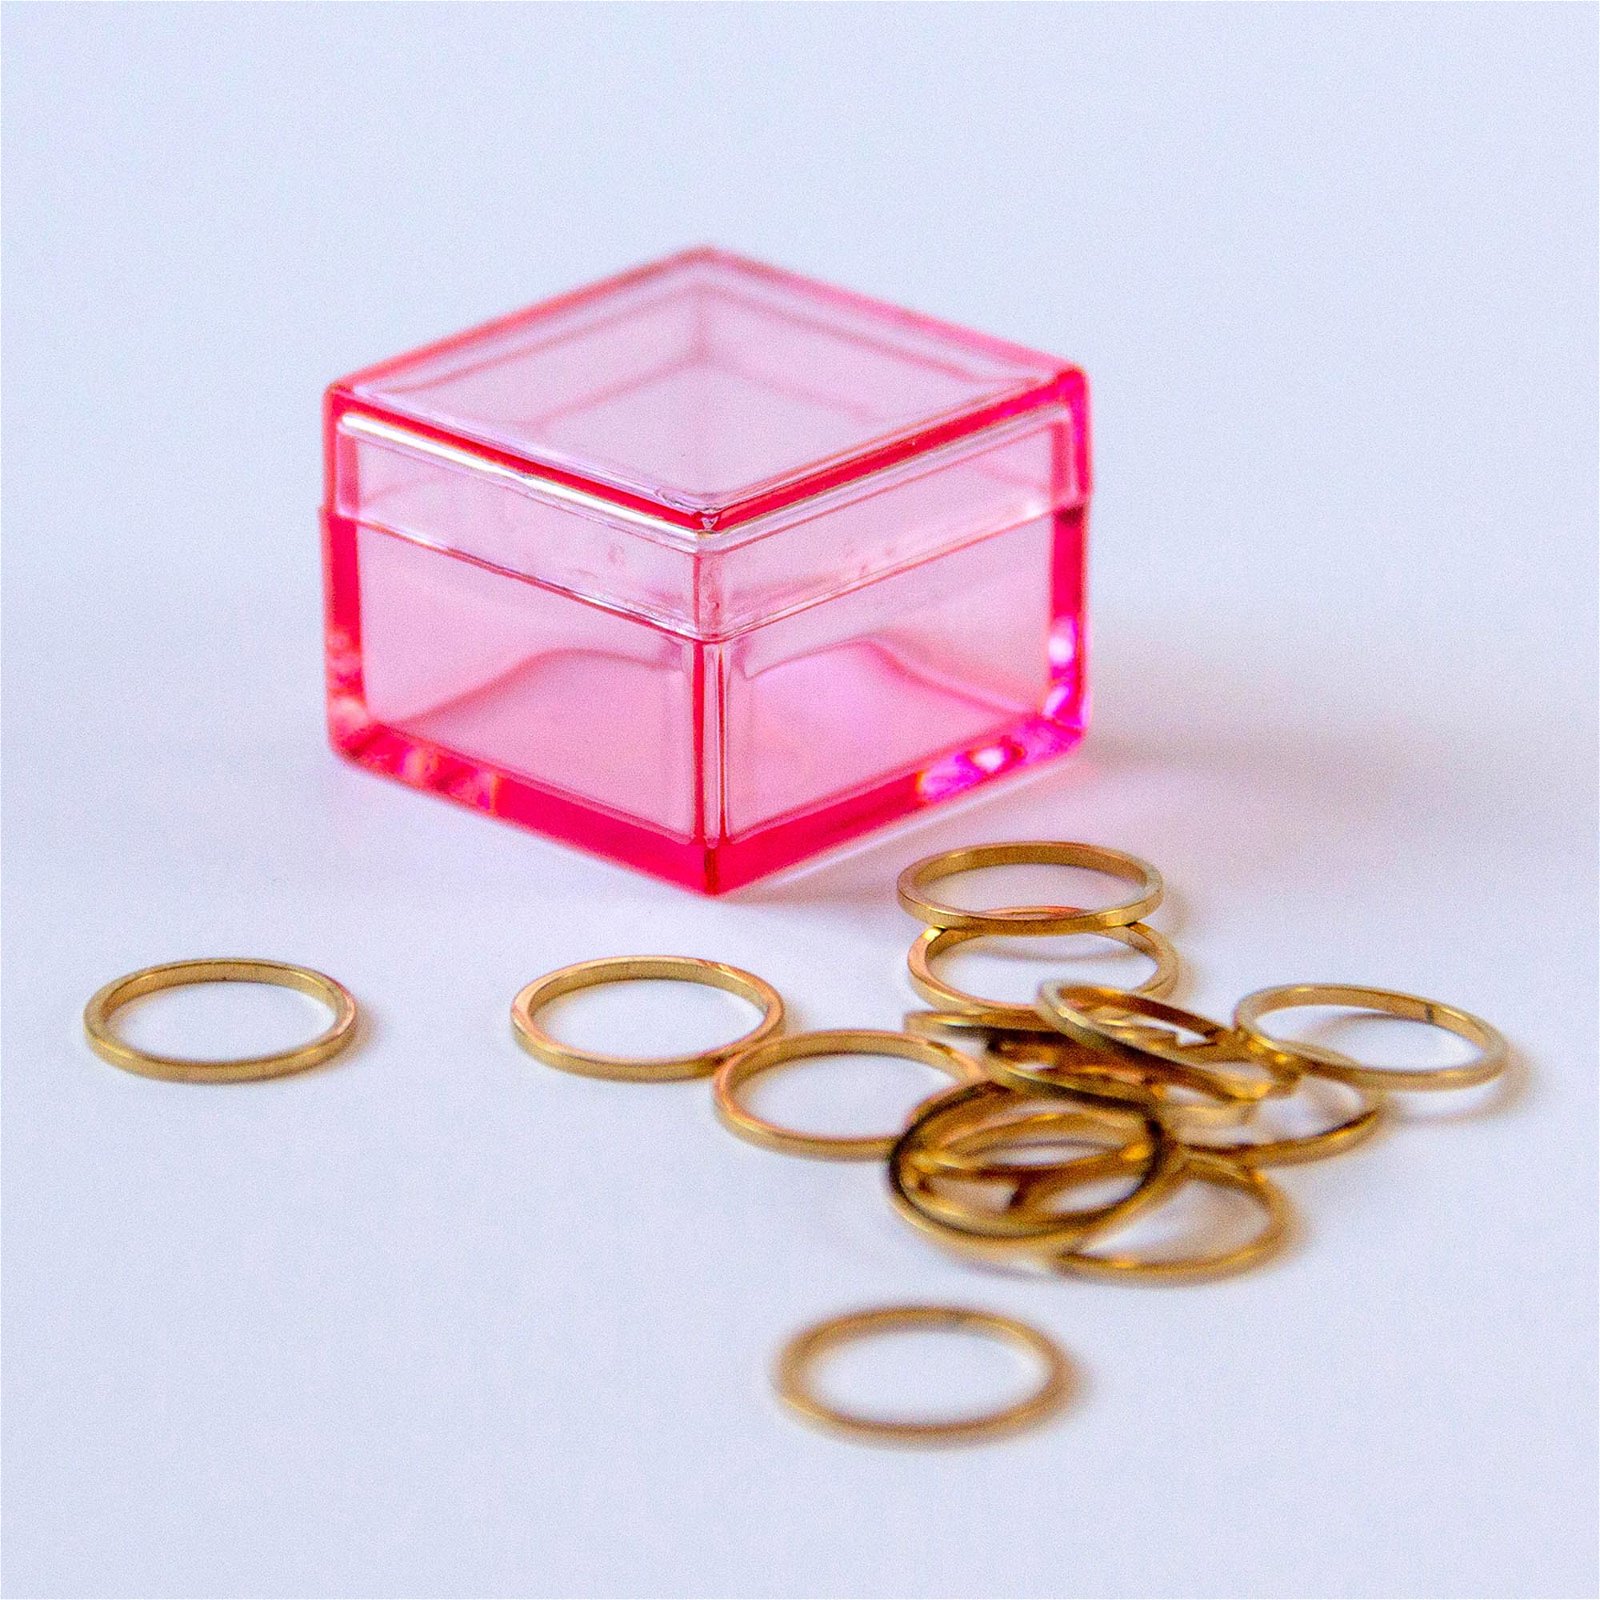 Image of Set of 15 Gold Circle Stitch Markers in Watermelon Pink Storage Box